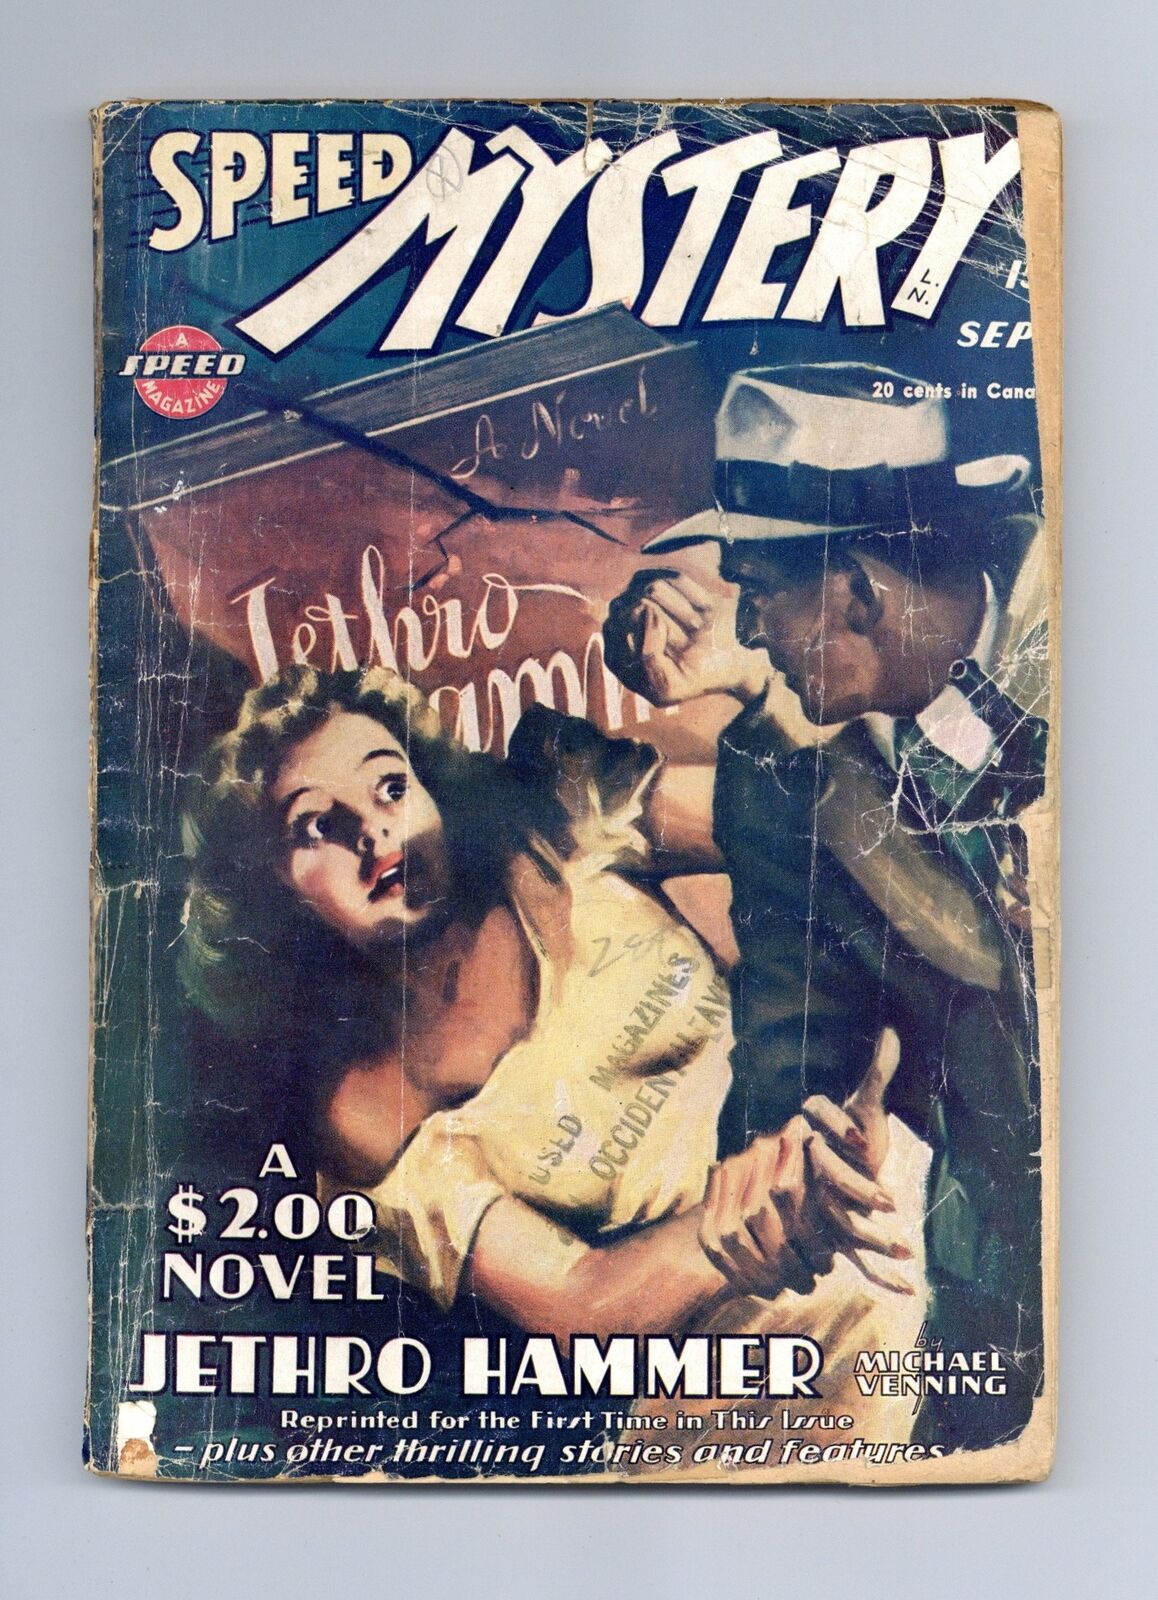 Speed Mystery Pulp Sep 1945 Vol. 3 #5 GD TRIMMED